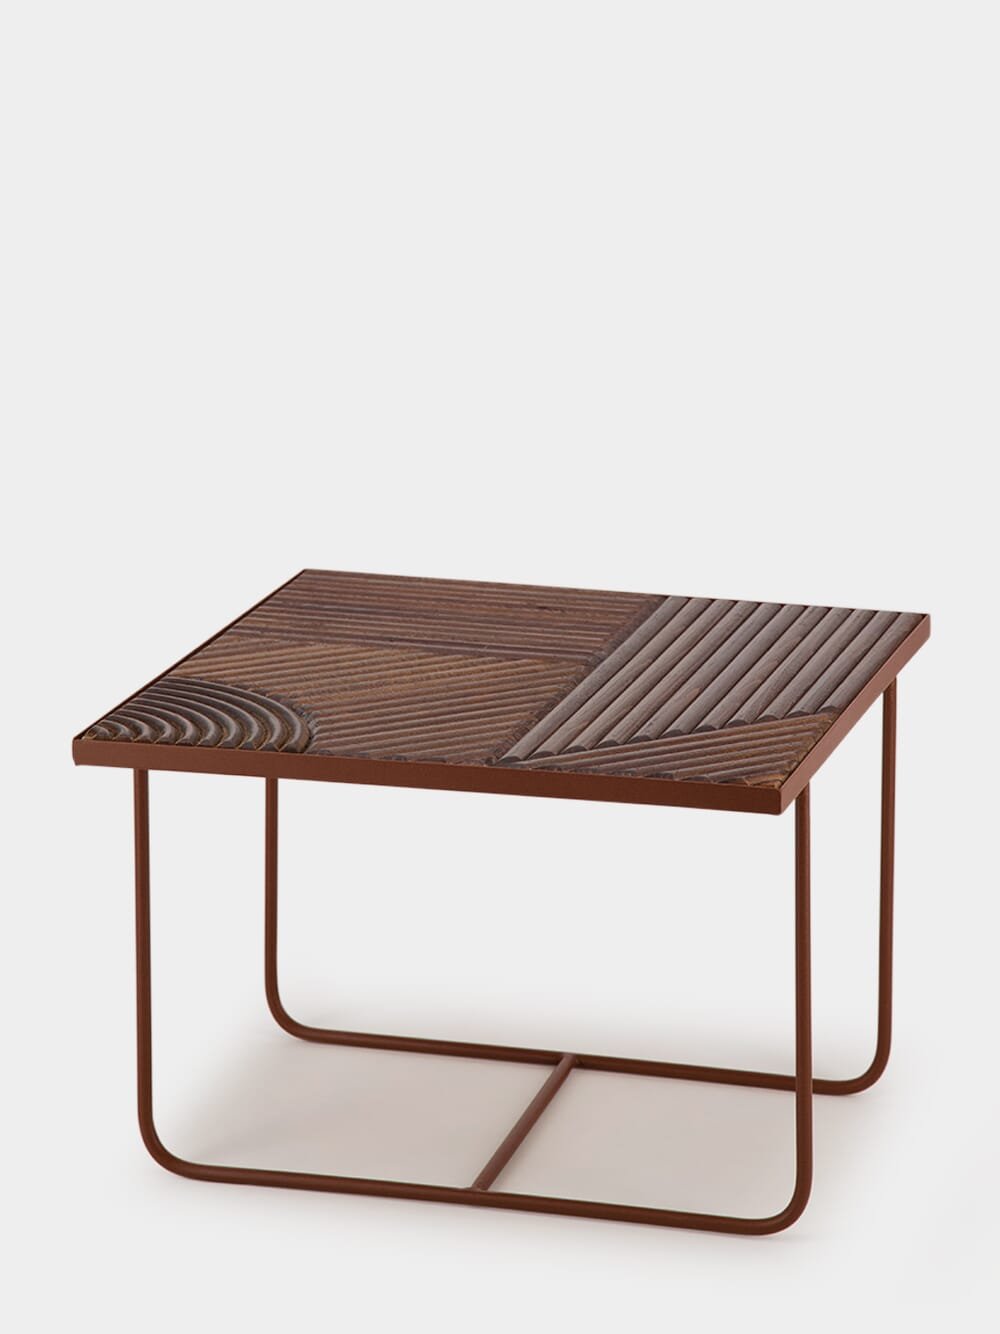 HonoréPaloma Brown Coffee Table at Fashion Clinic